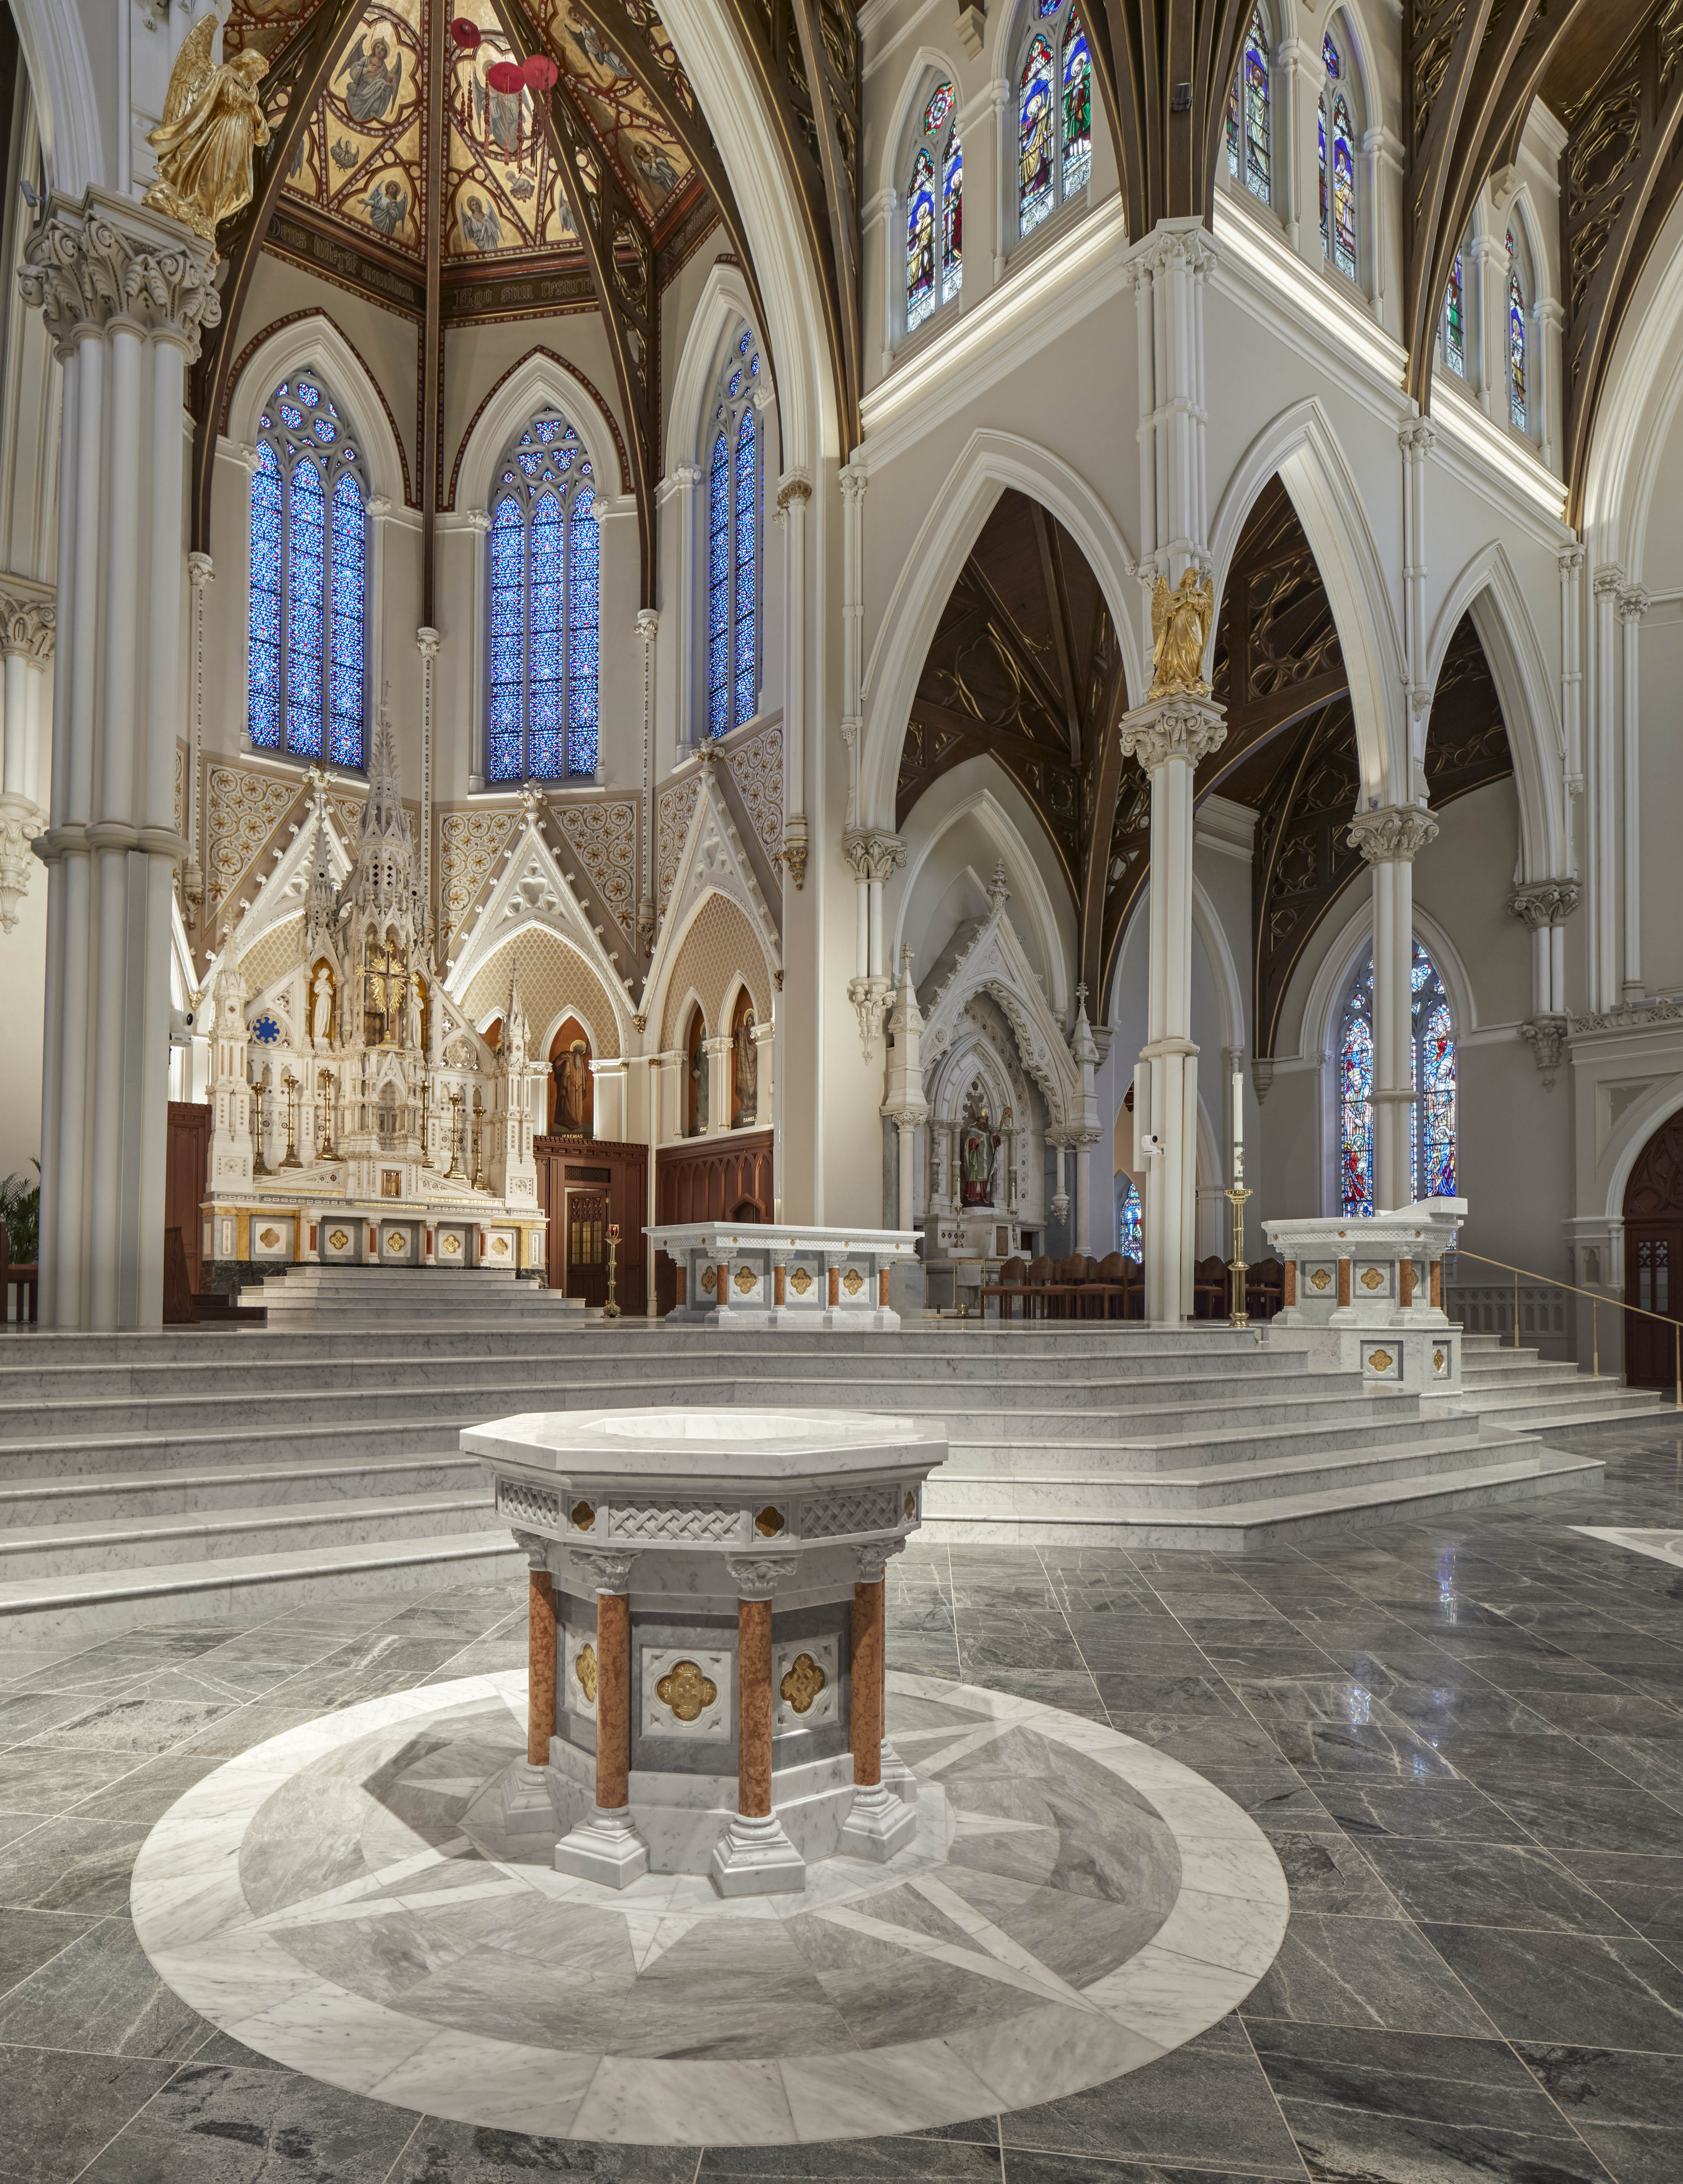 Cathedral of the Holy Cross interior sanctuary and baptismal font